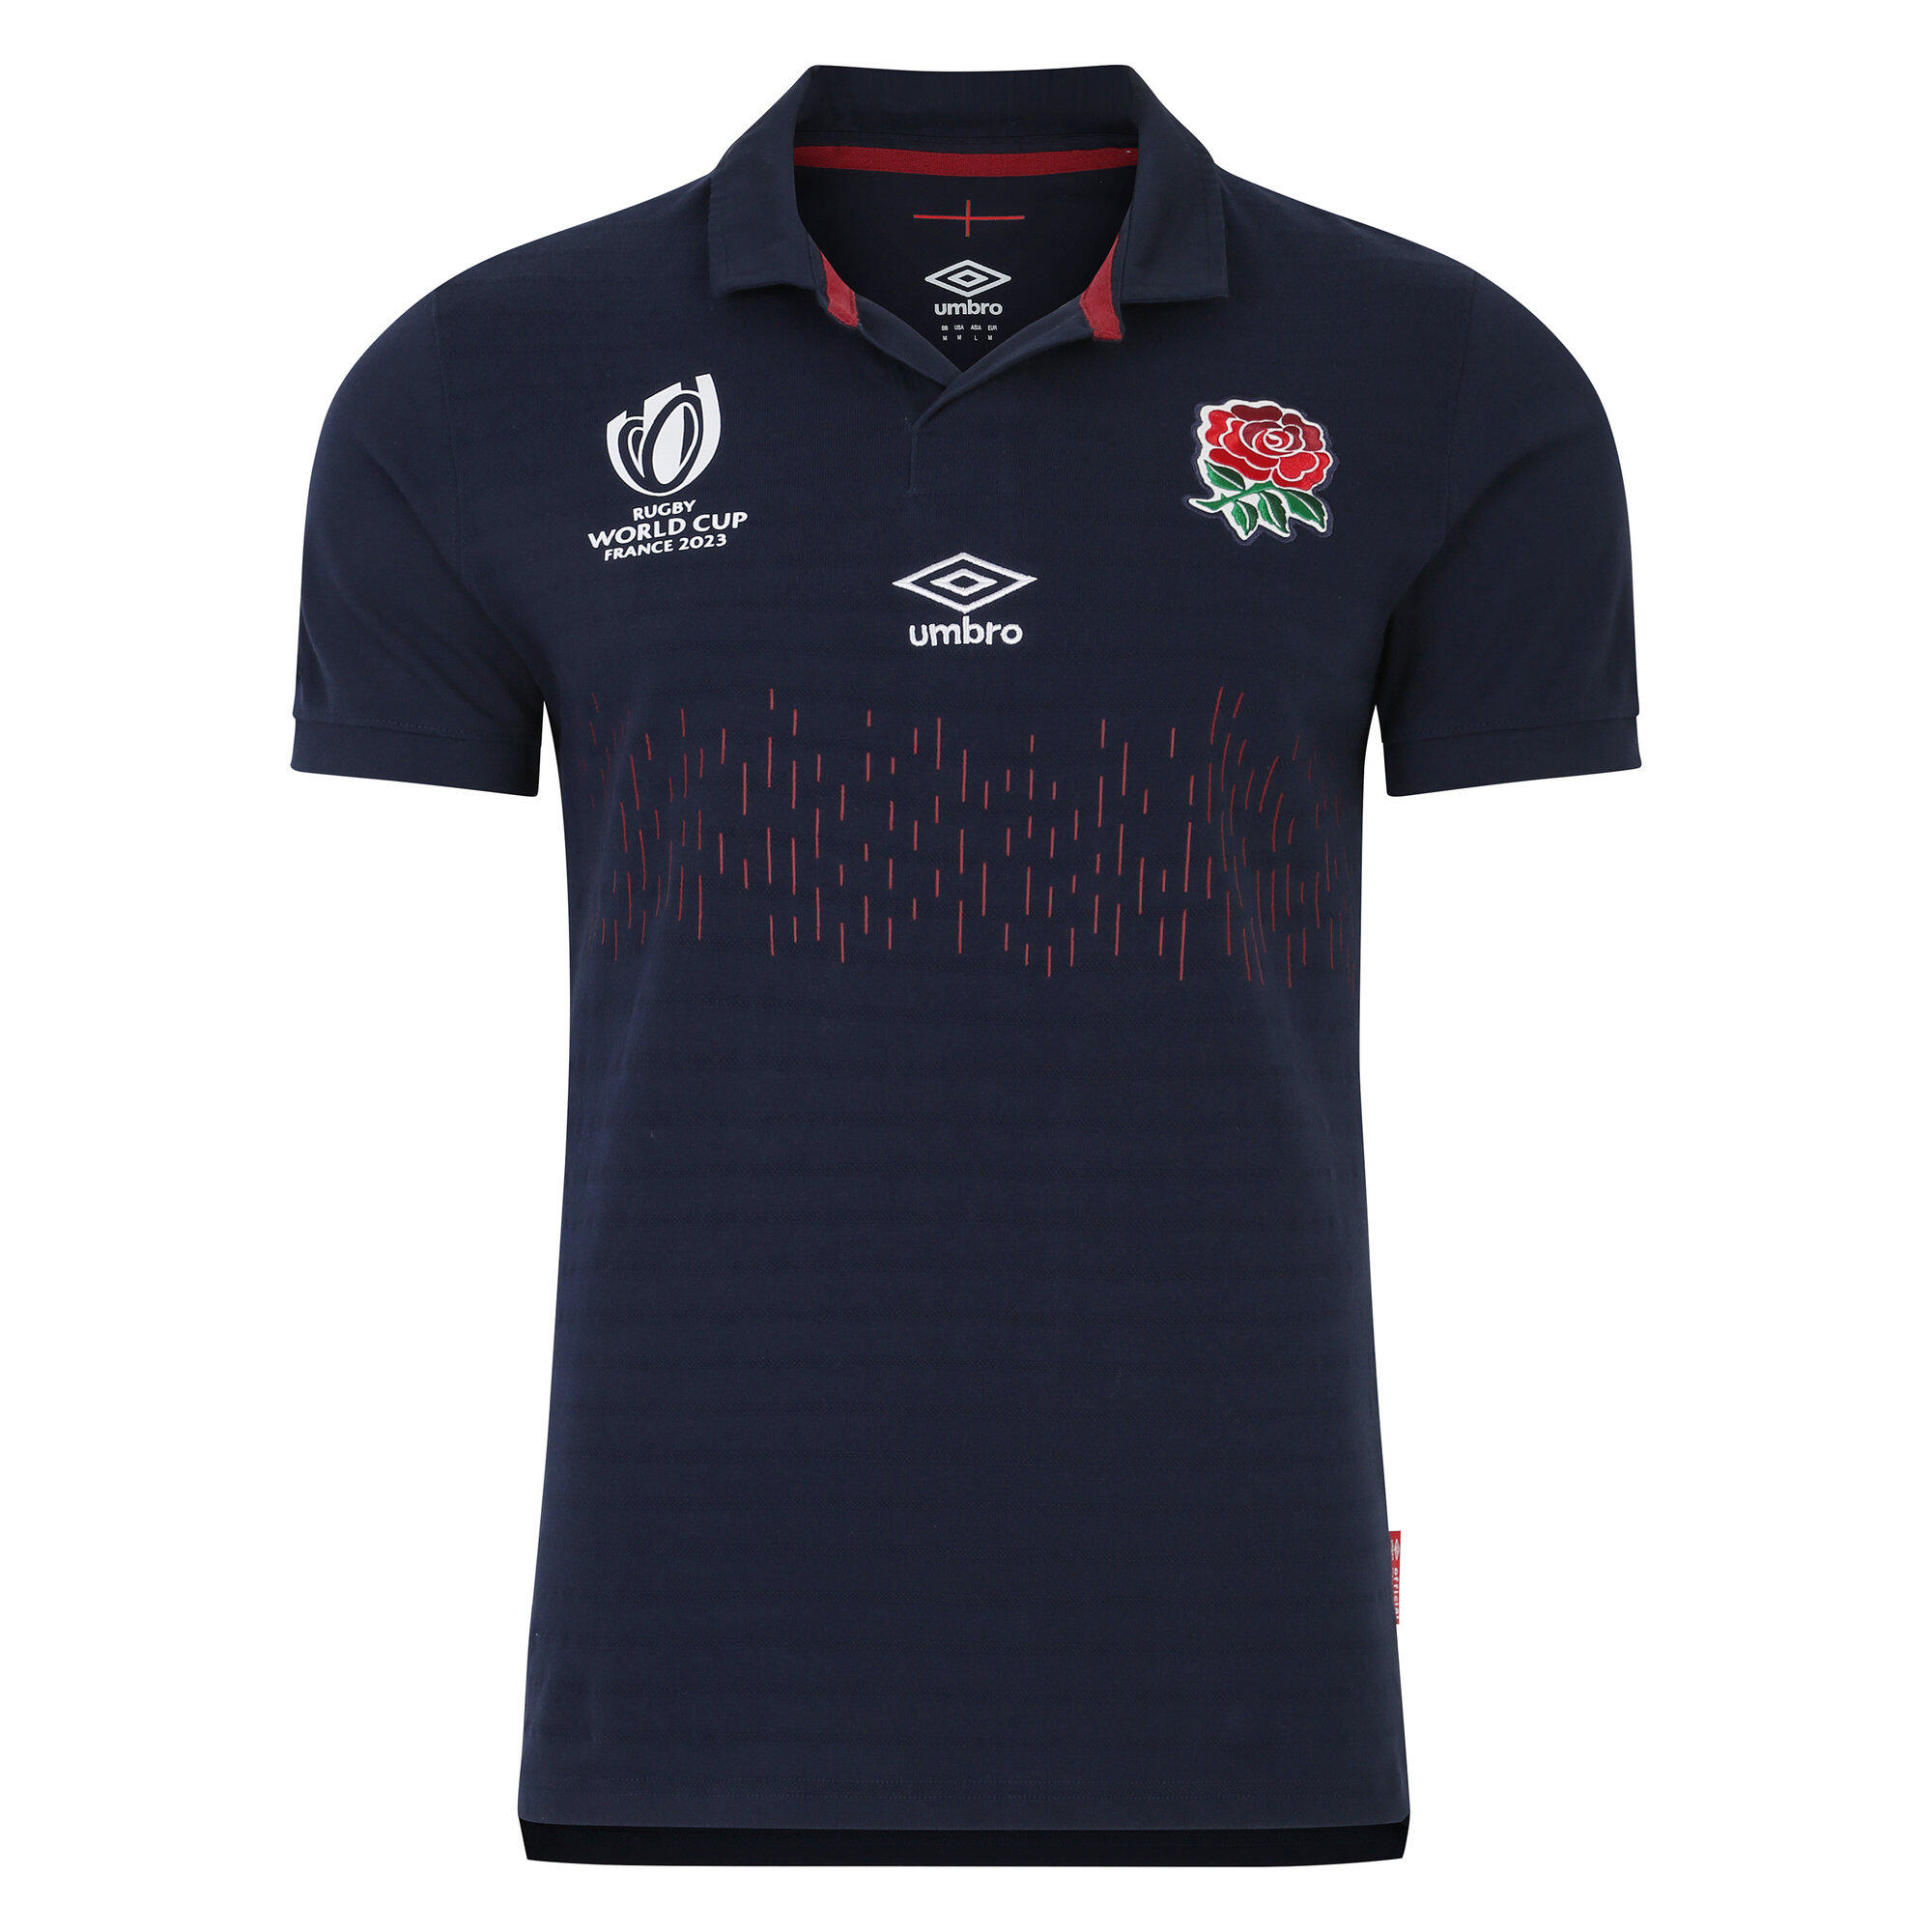 UMBRO Unisex Adult World Cup 23/24 England Rugby Alternative Jersey (Navy